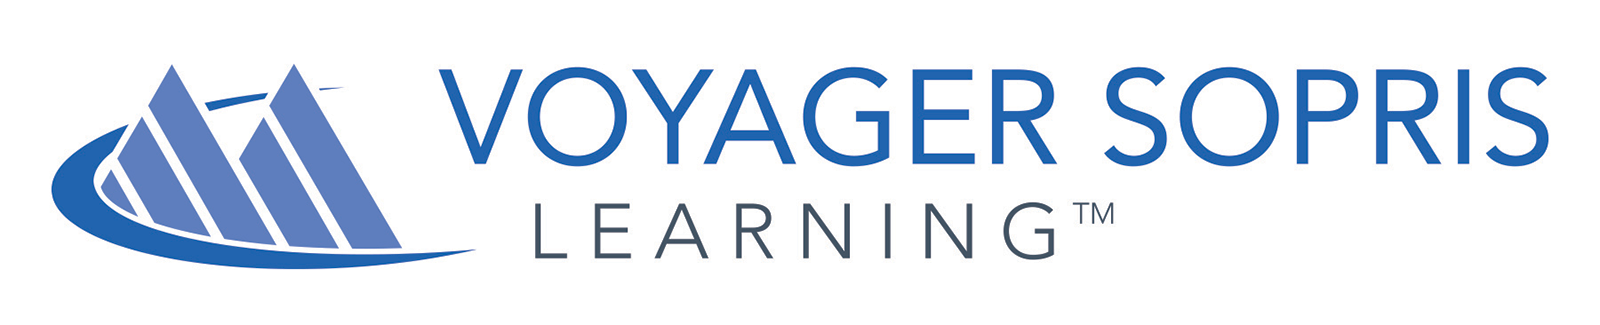 voyager sopris learning inc